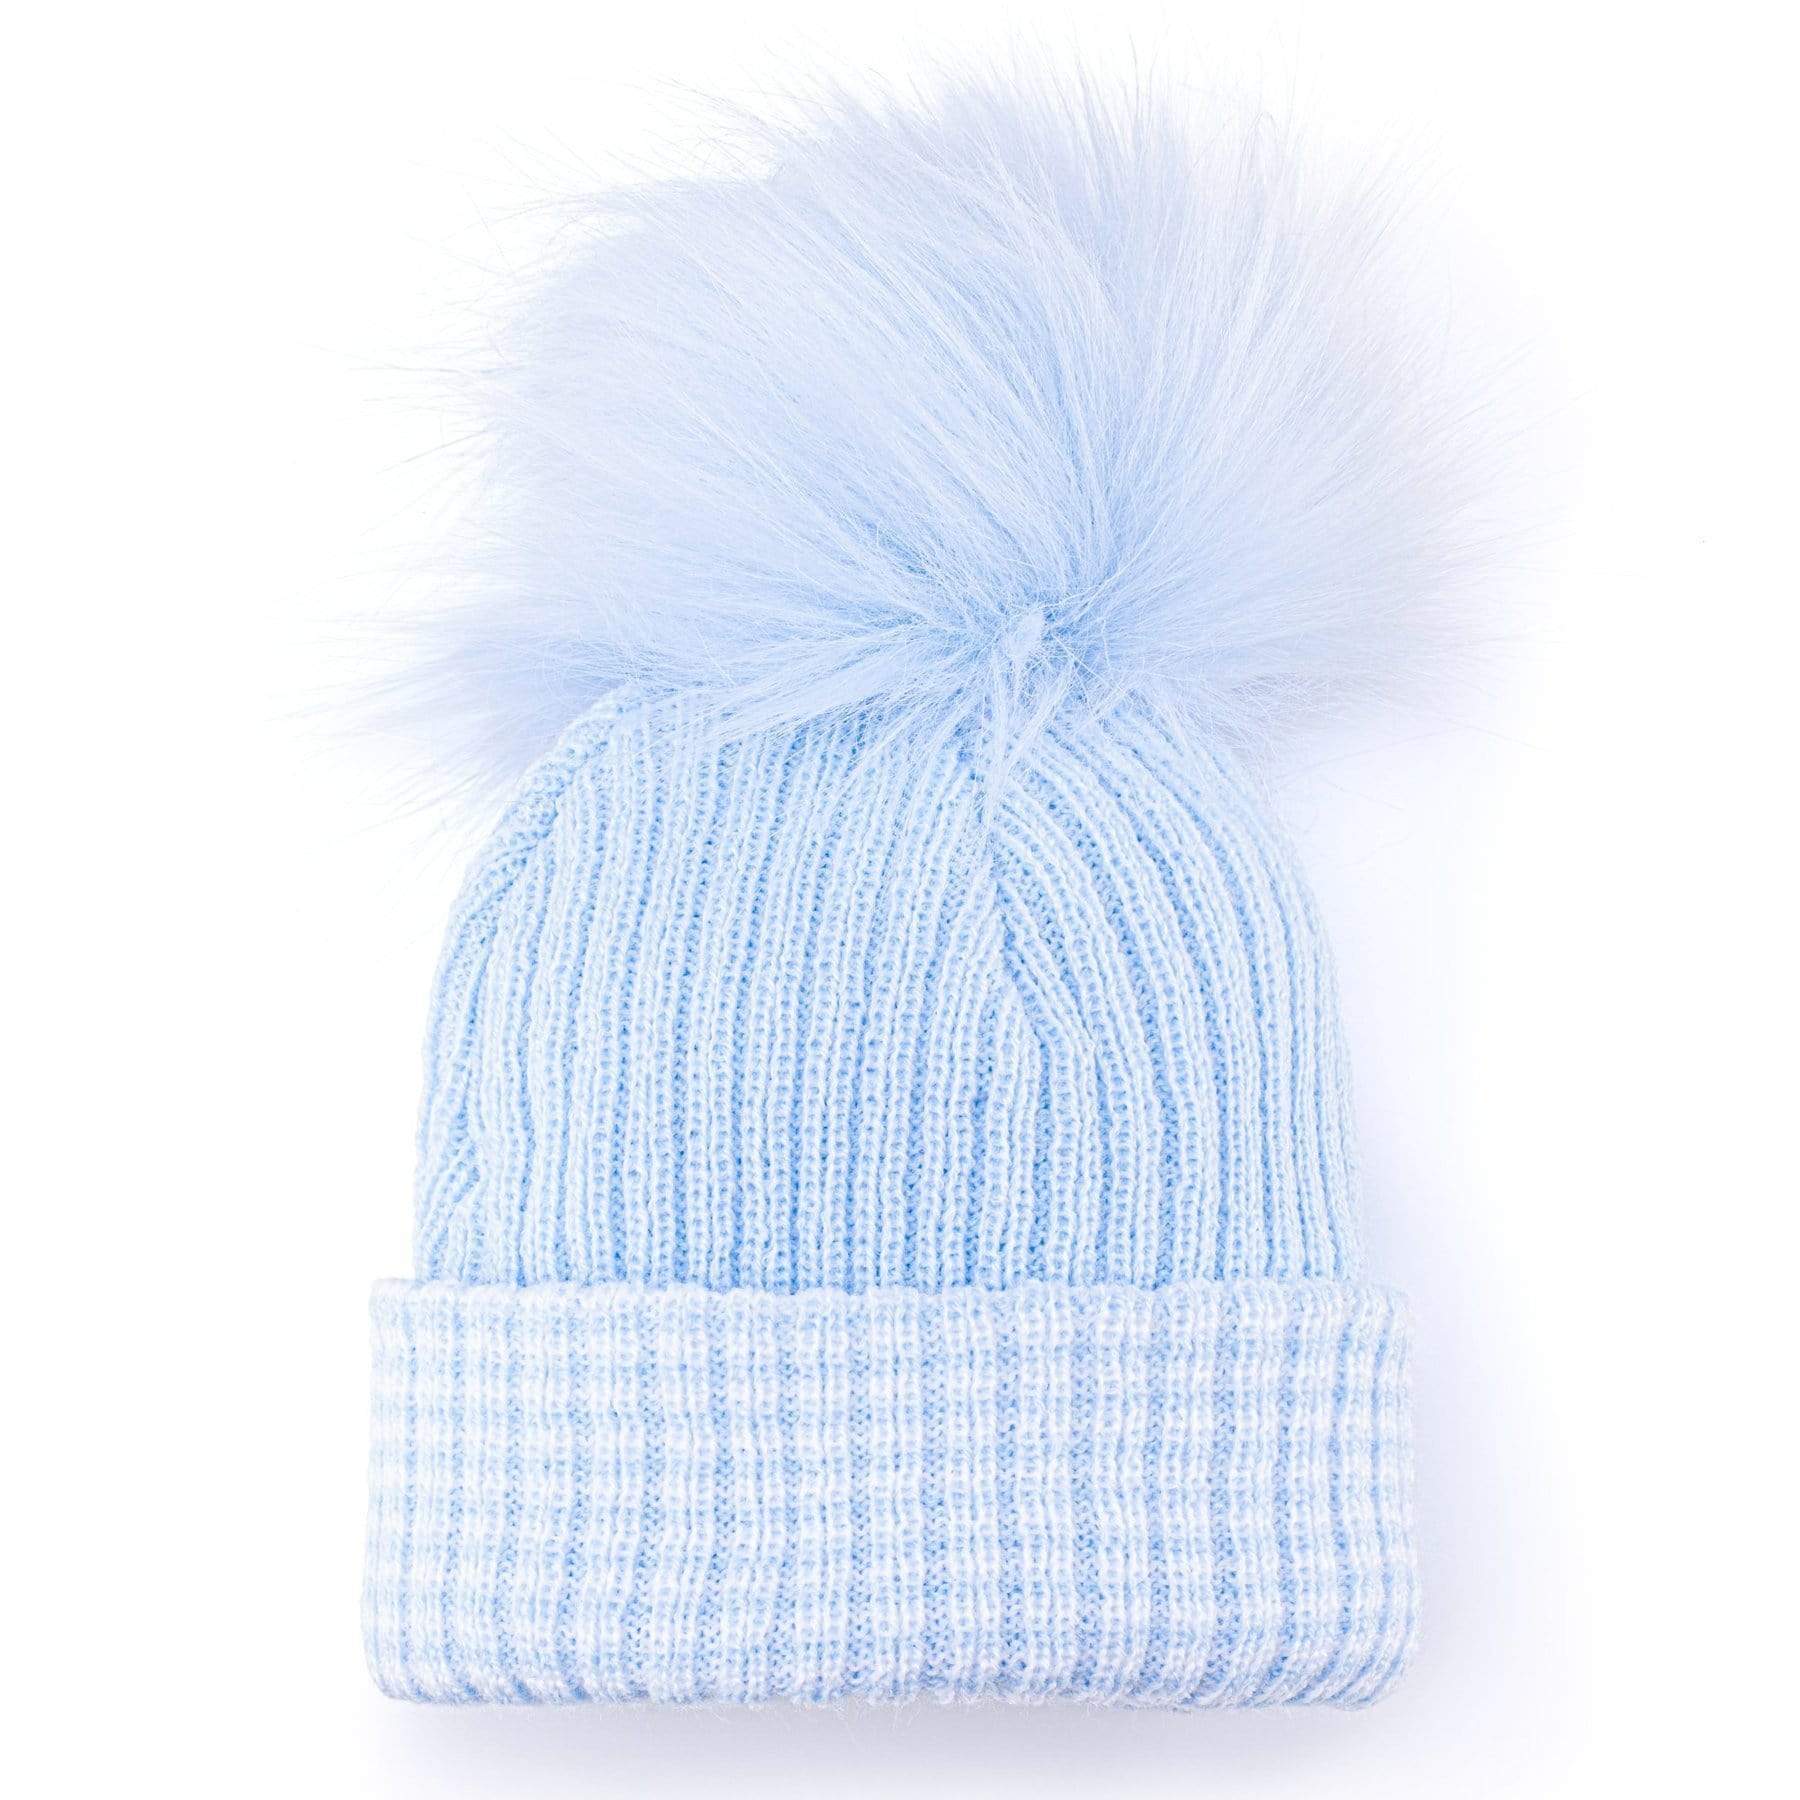 Soft Blue Boys Cross Cable Knit Hat with Large PomPom by Rock a Bye Baby - Bumbles &amp; Boo